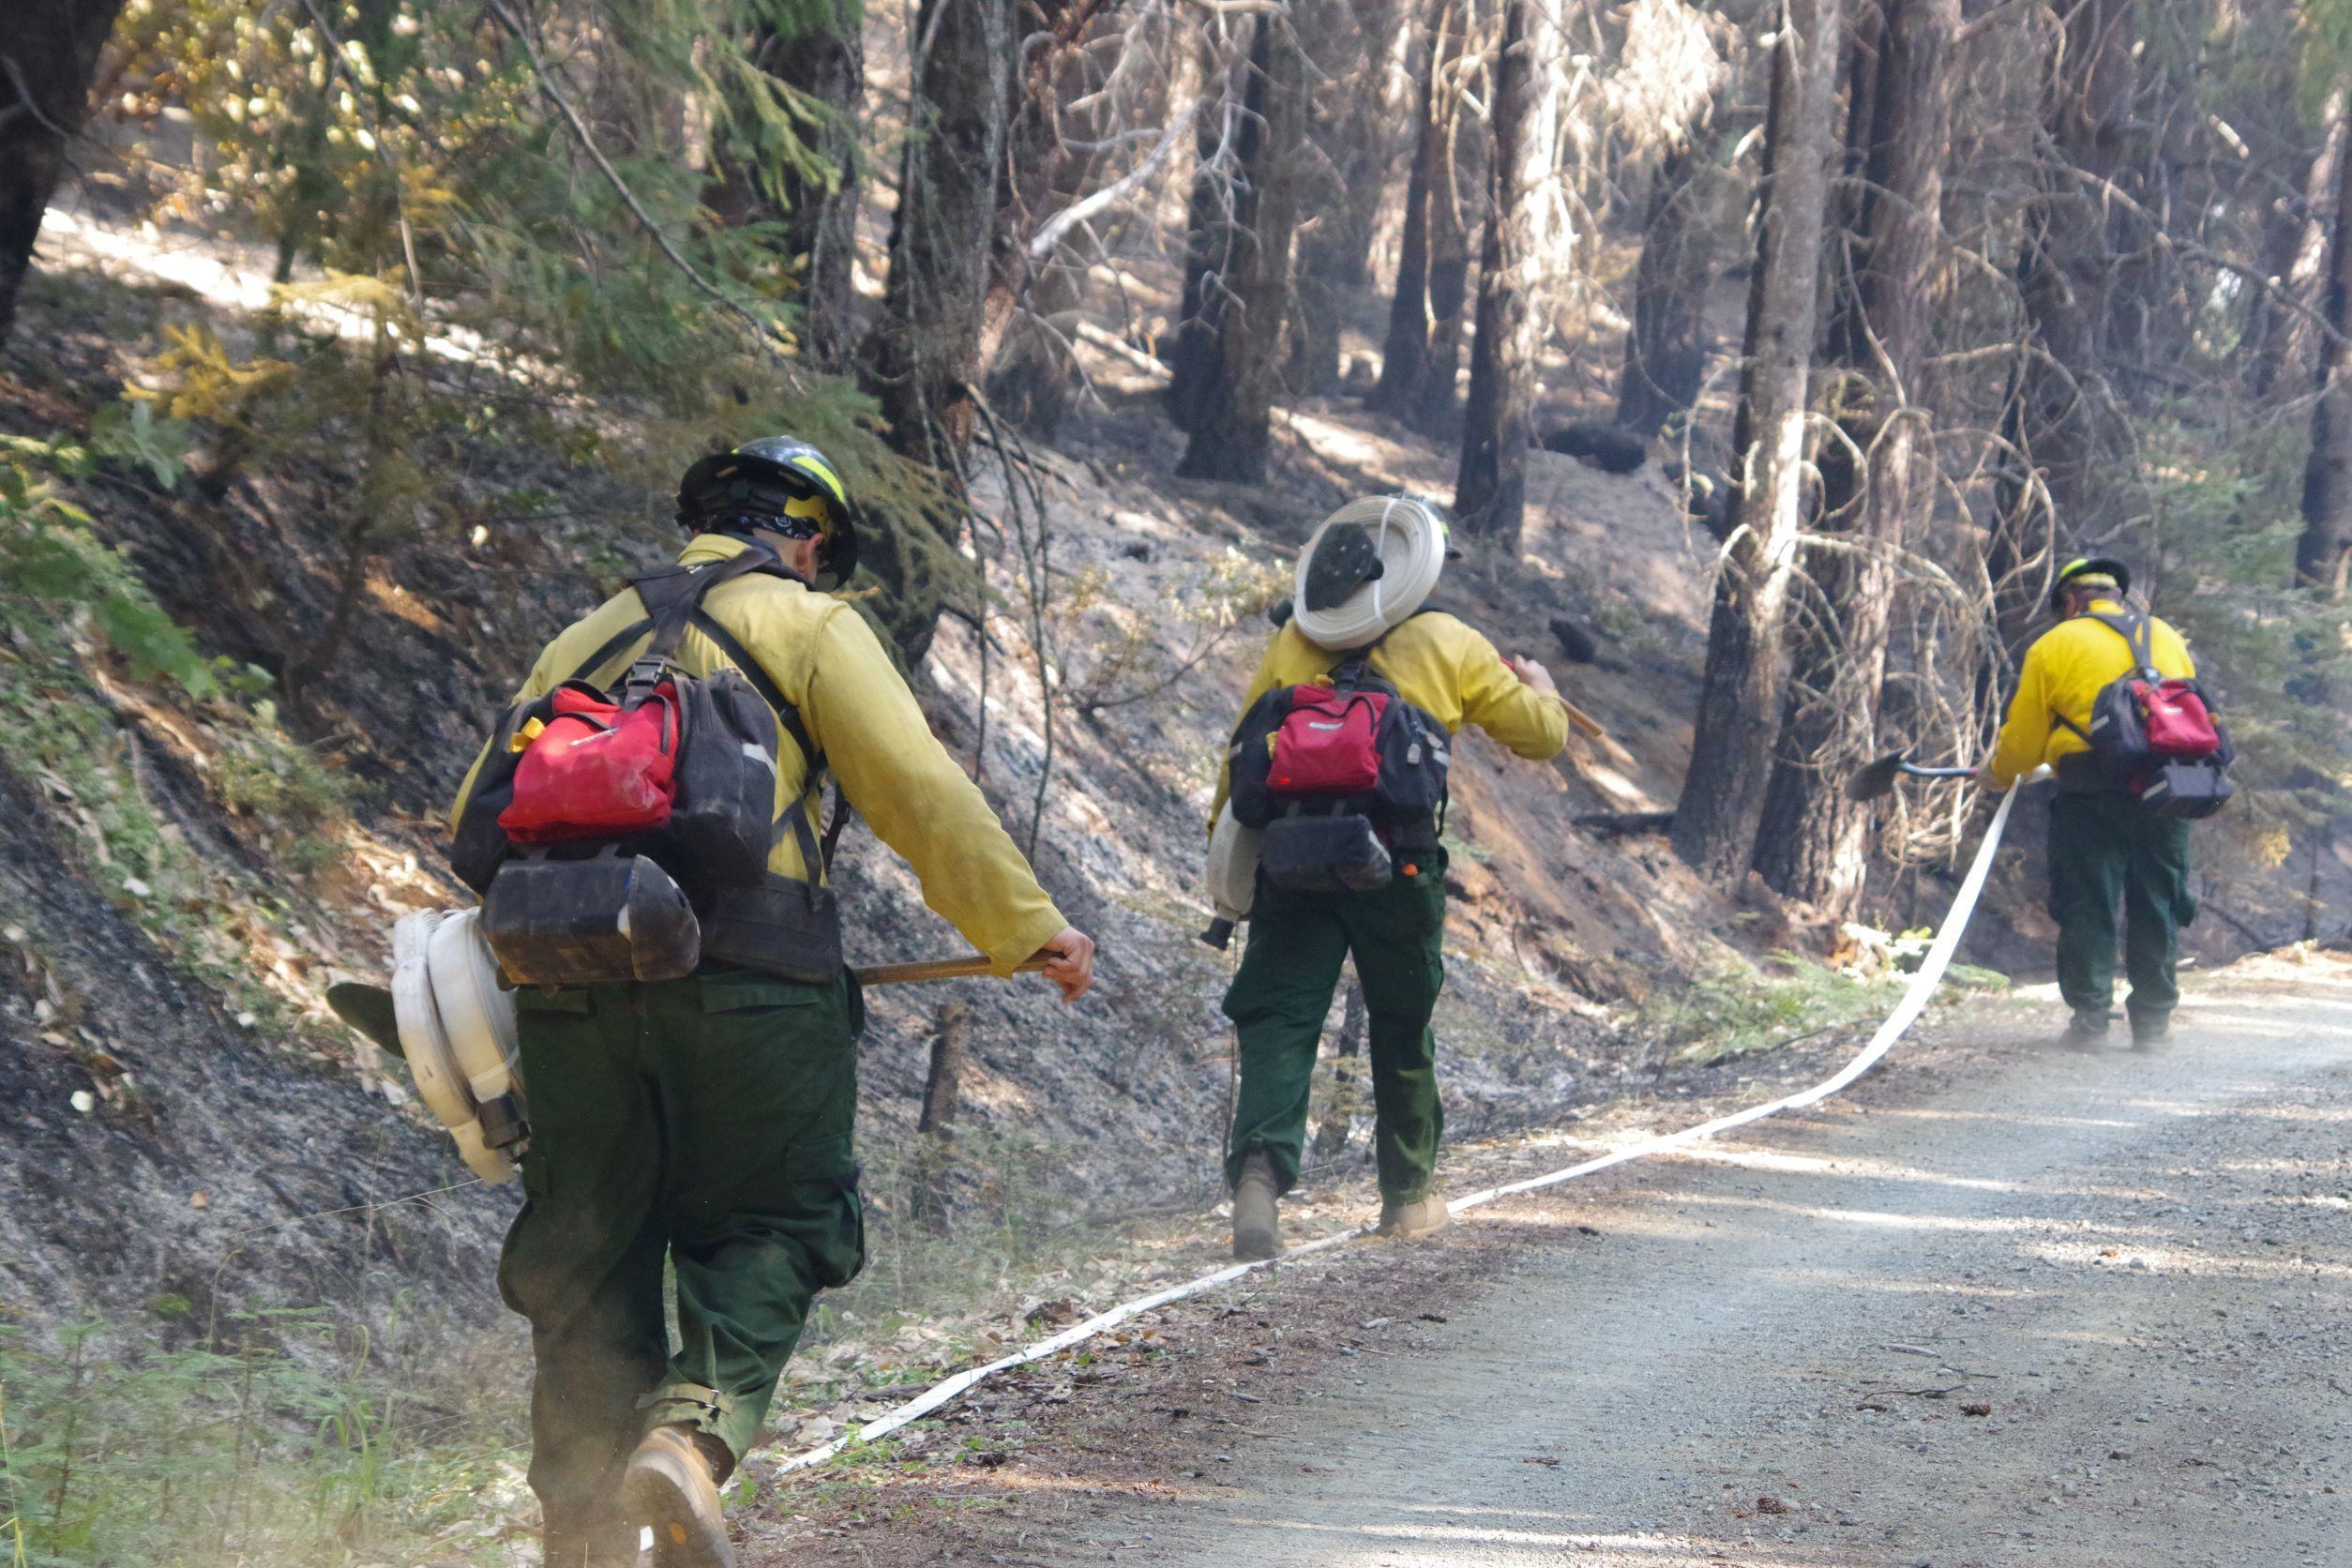 Two firefighters are carrying rolls of fire hose along a road. A third firefighter is unrolling hose along the road. The slope behind them has burned and is ready to be mopped up.